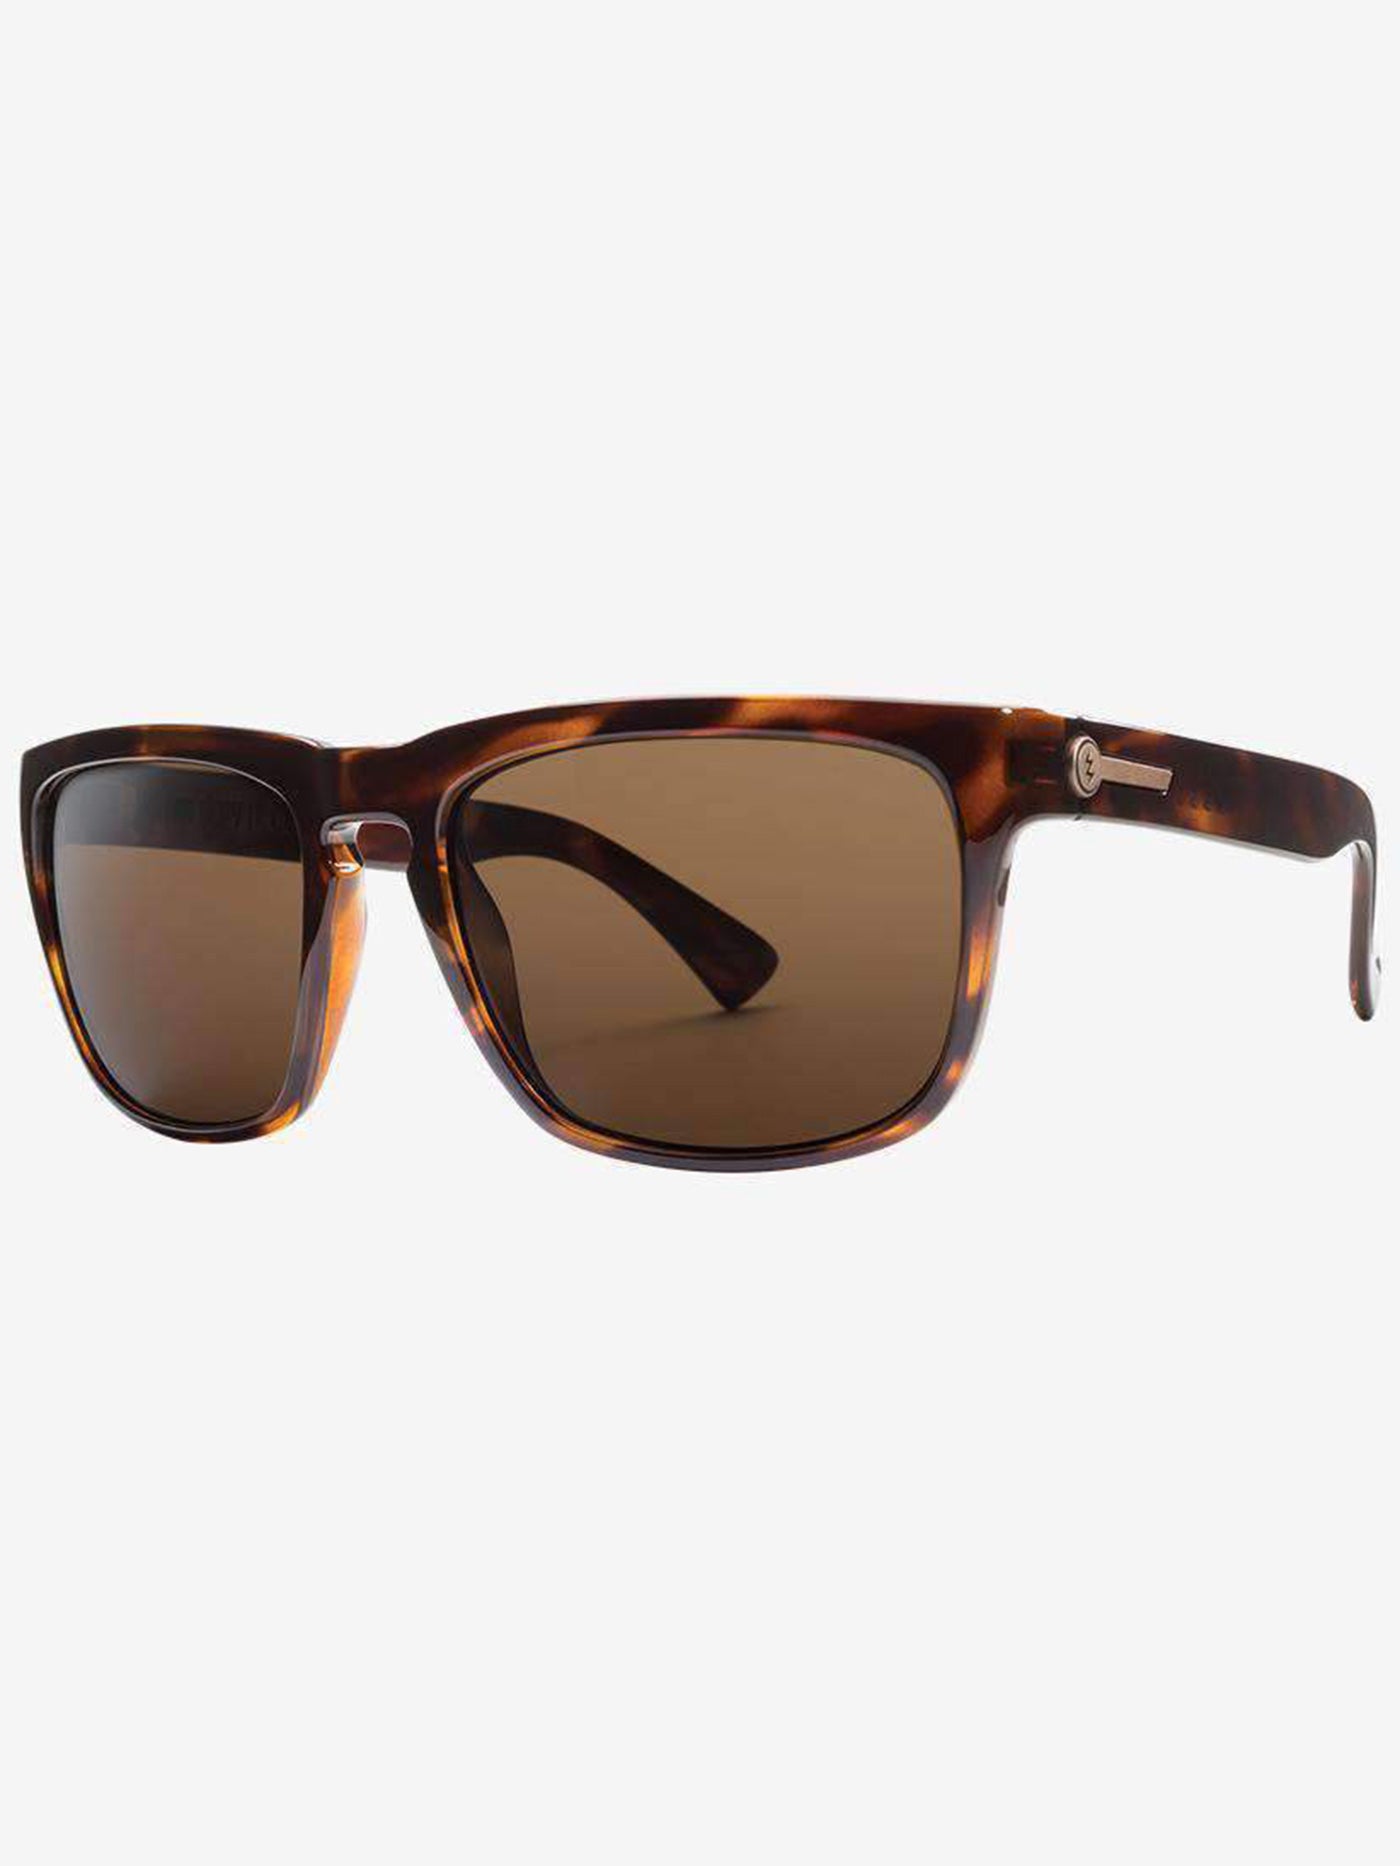 Electric Knoxville Tortoise Sunglasses